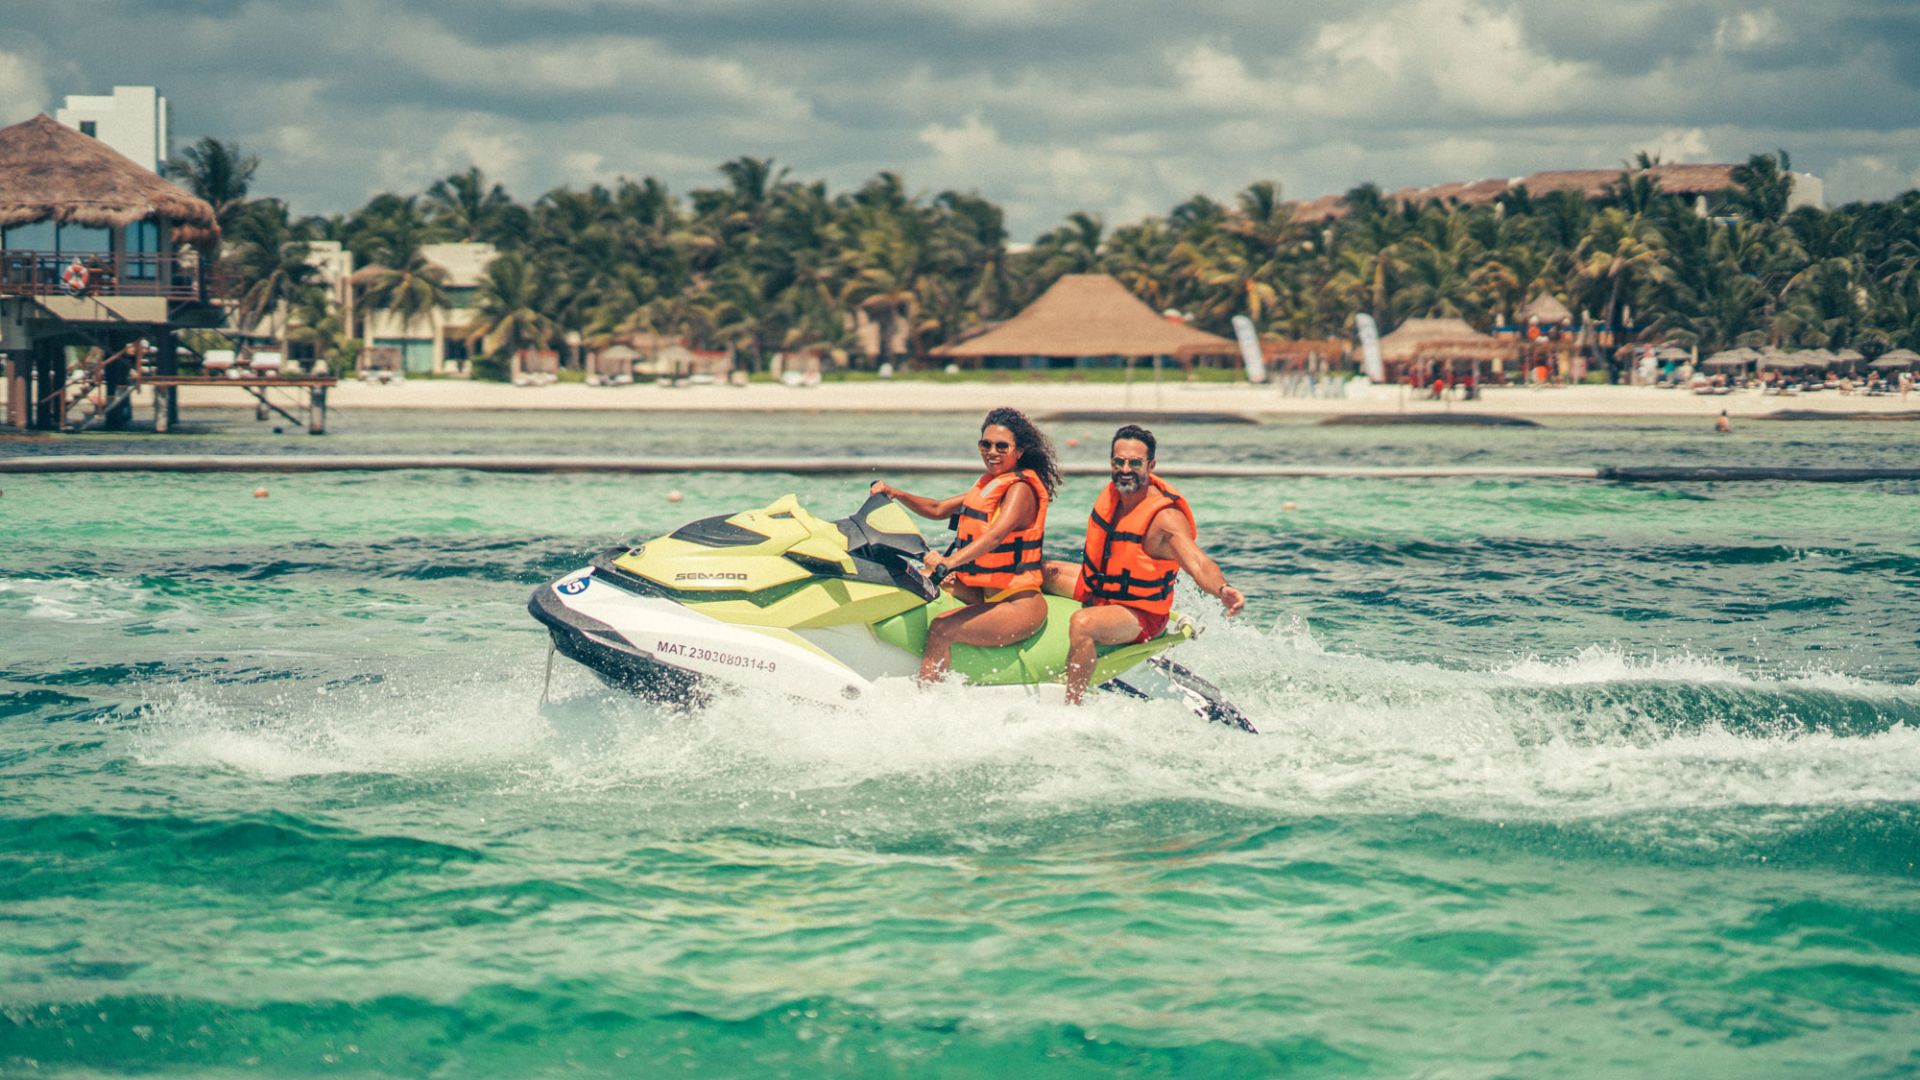 A Group Of People Riding A Jet Ski On The Water